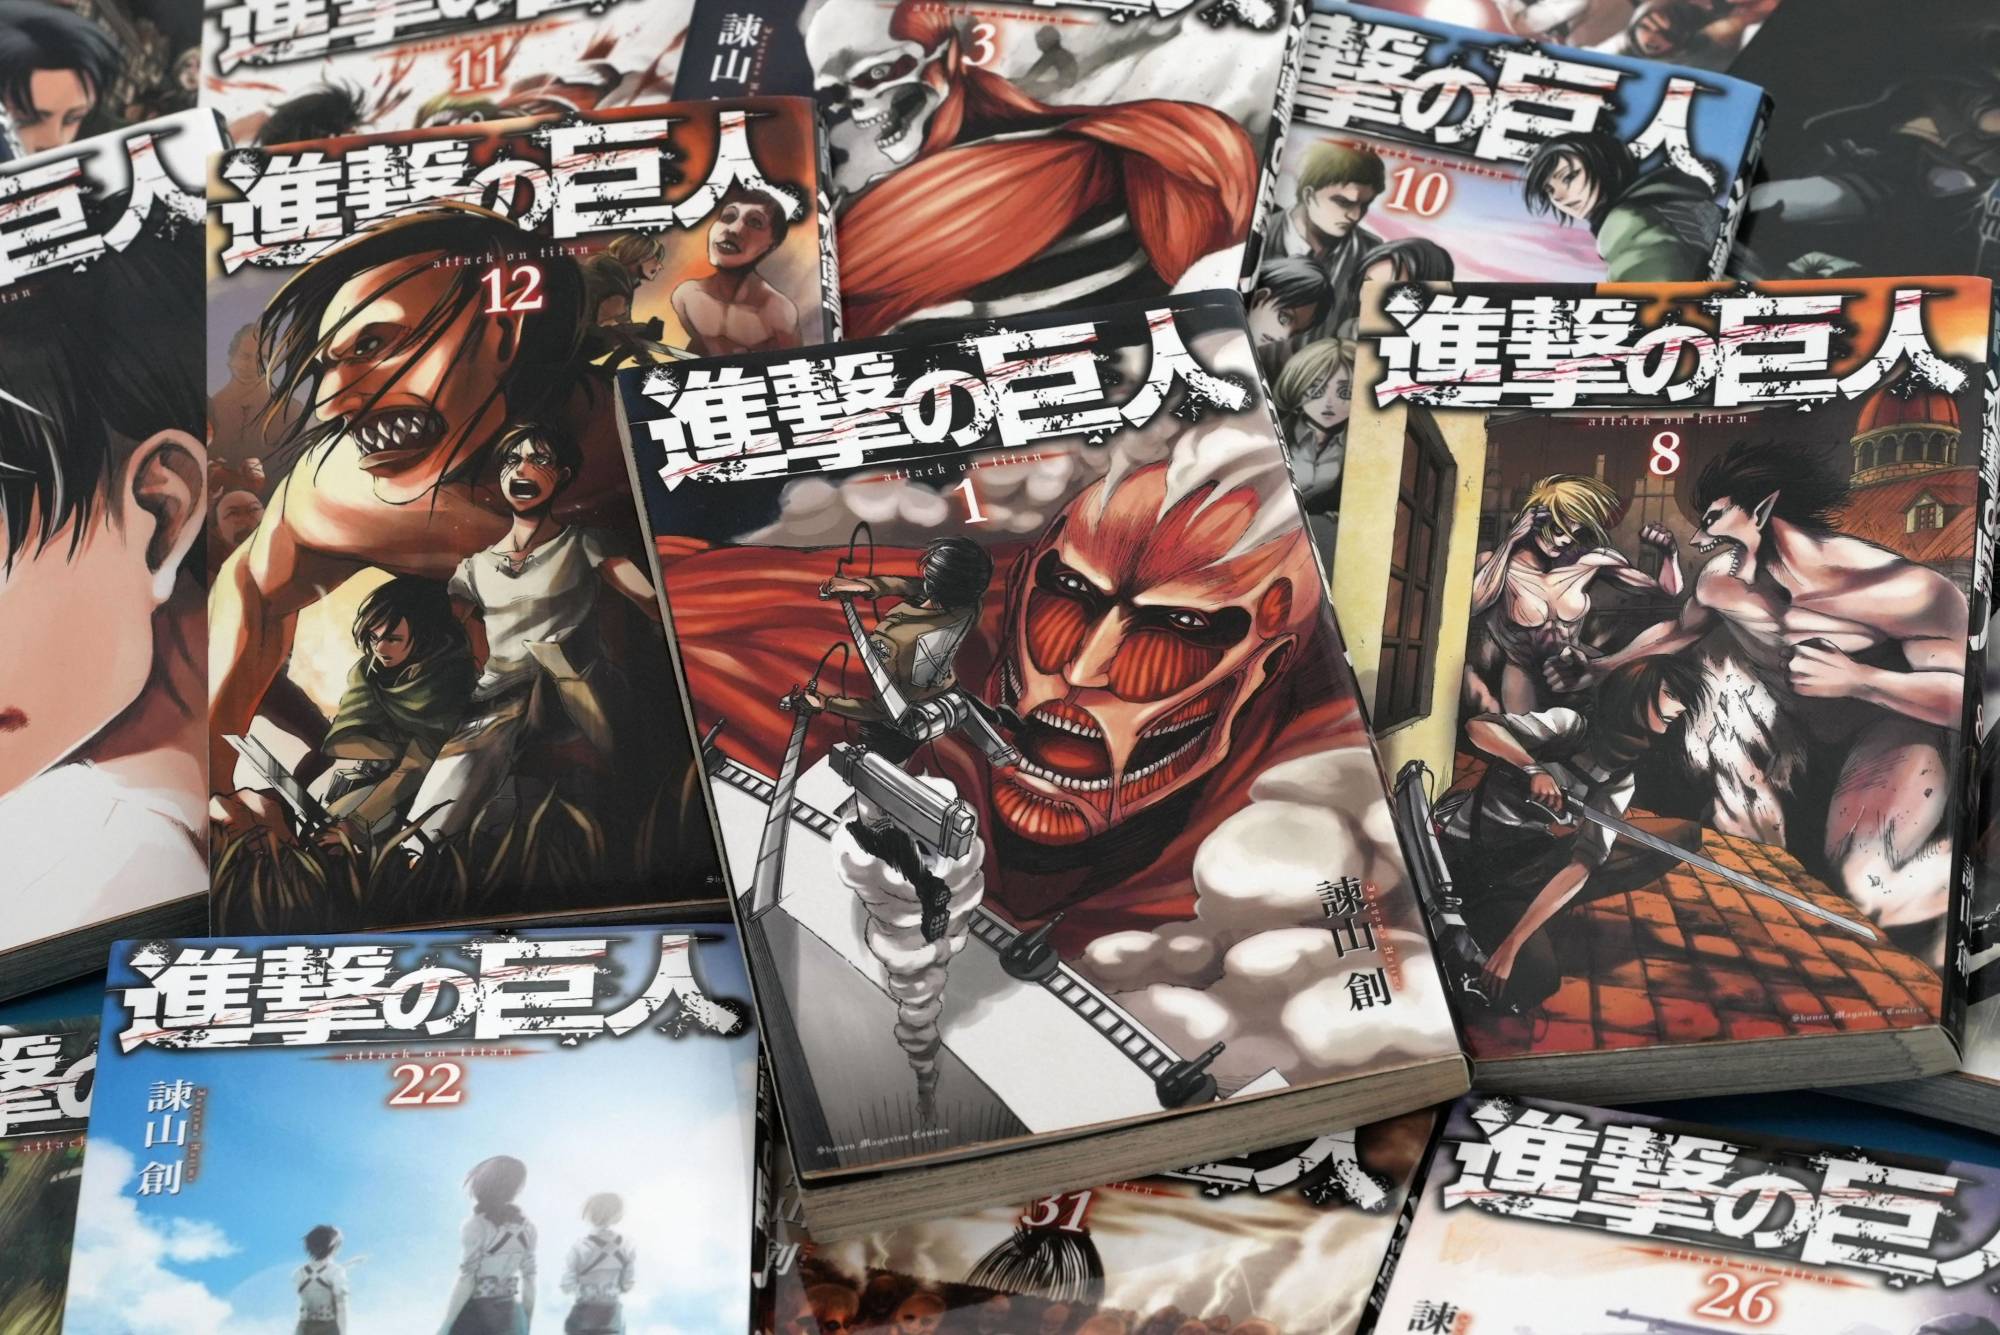 Attack on Titan' Manga Set to End in April